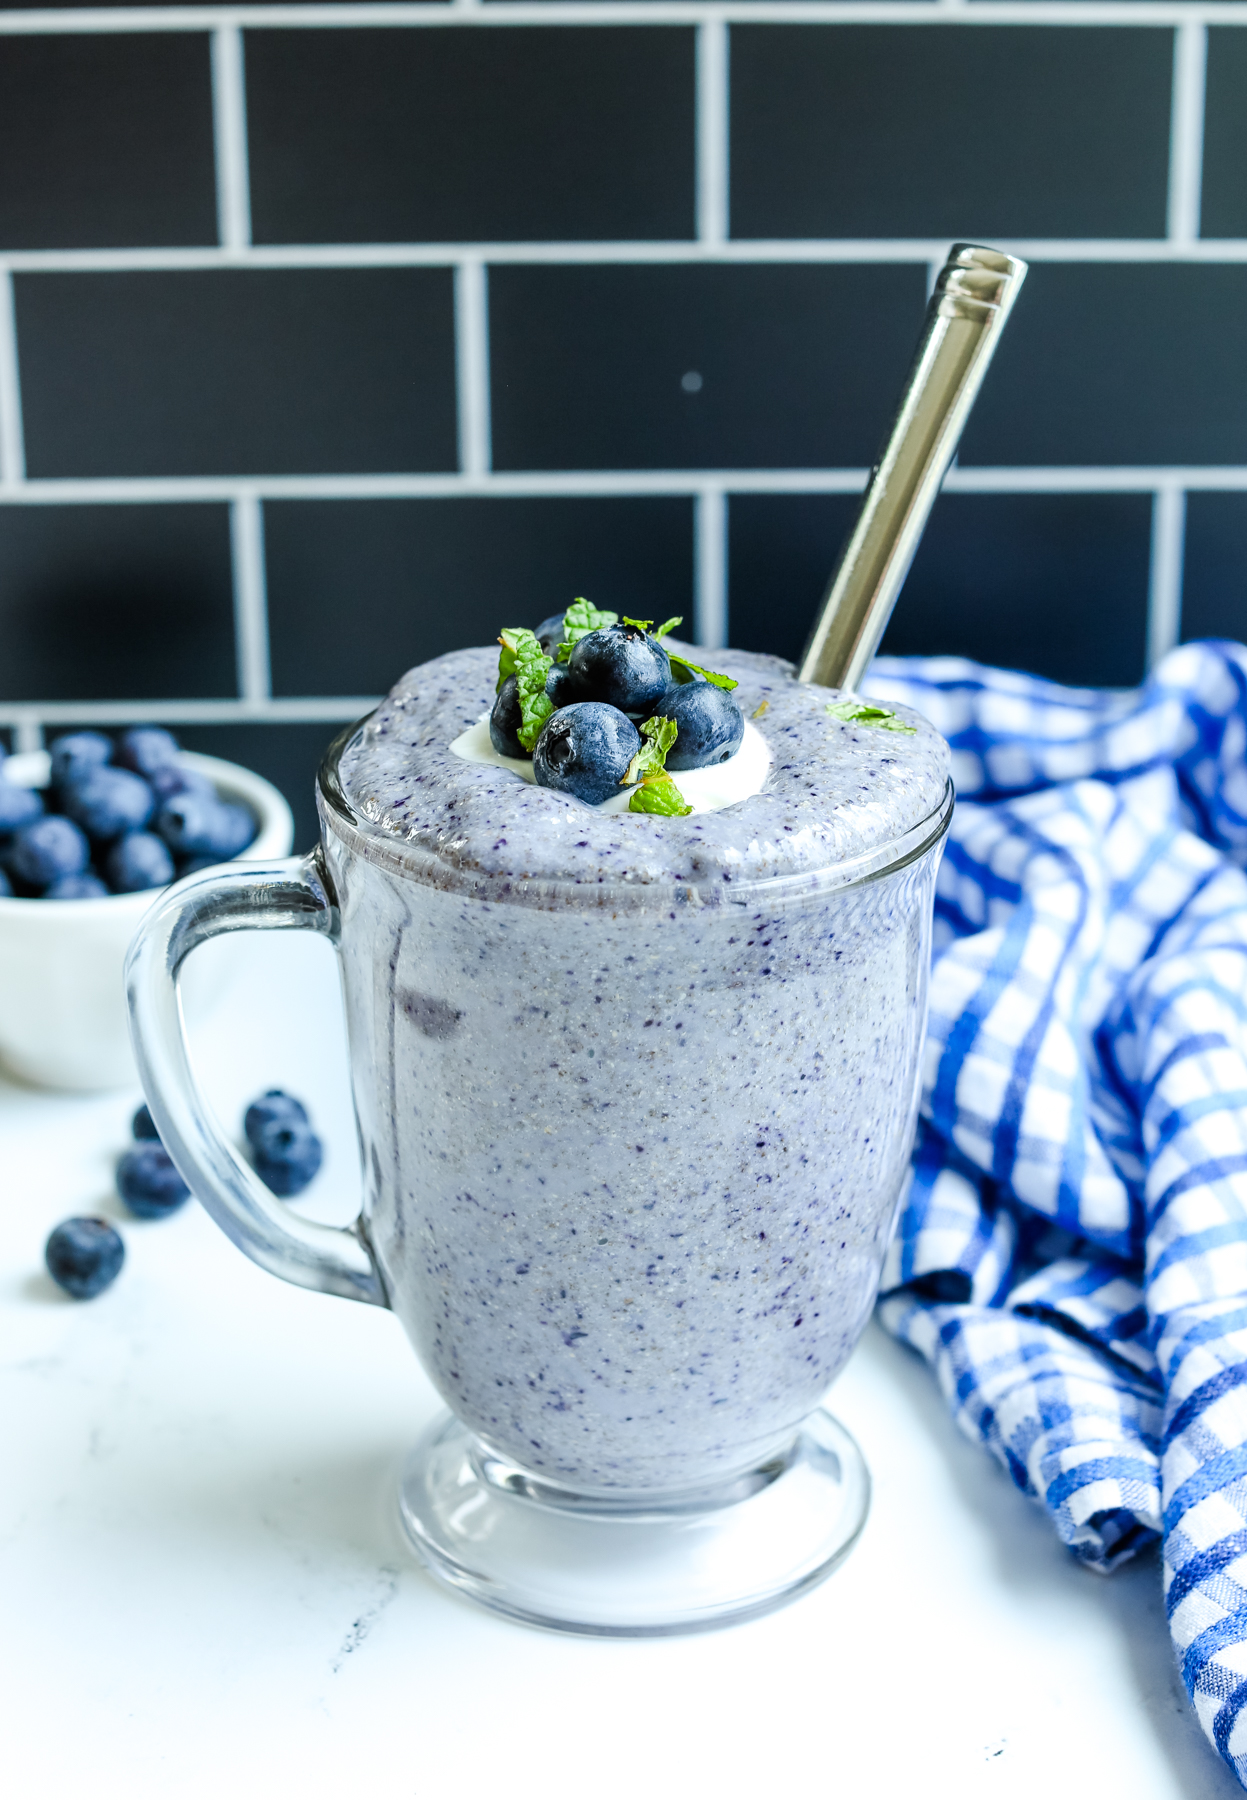 Blueberry Chia Pudding recipe in a glass mug with fresh blueberries on top